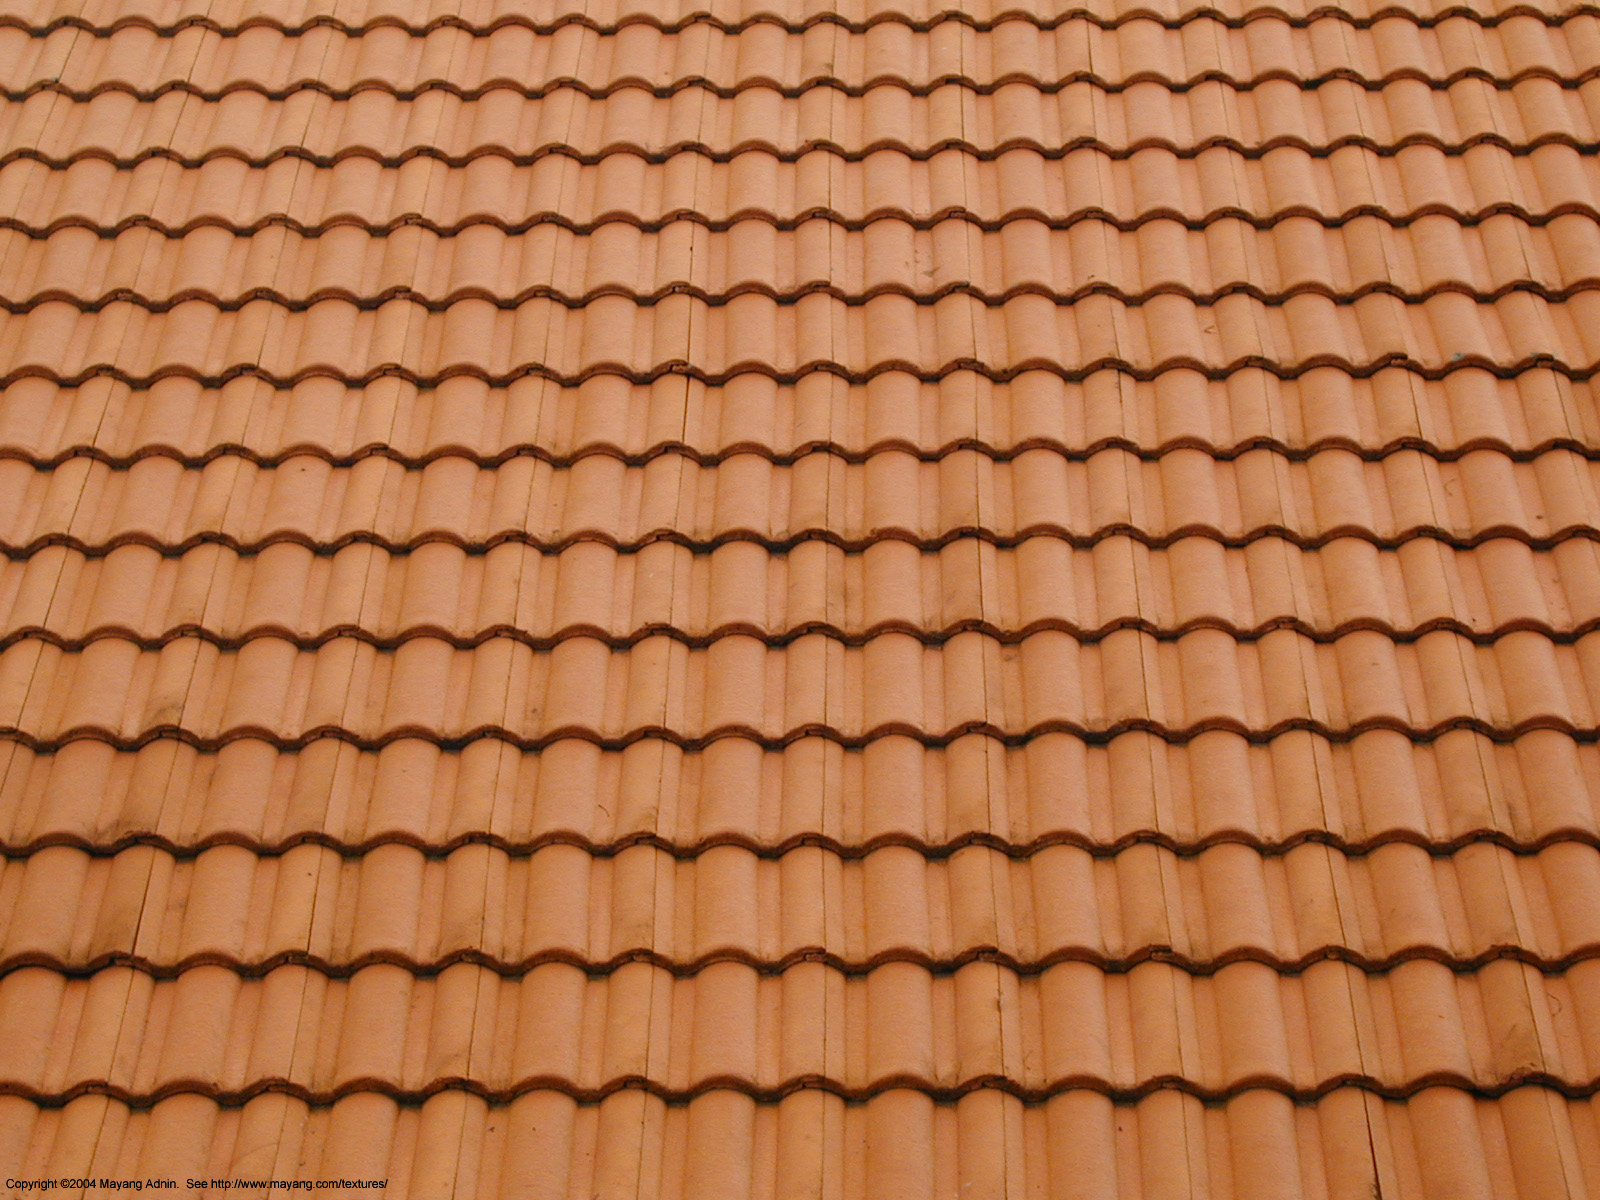 My Home Design Roof Tiles